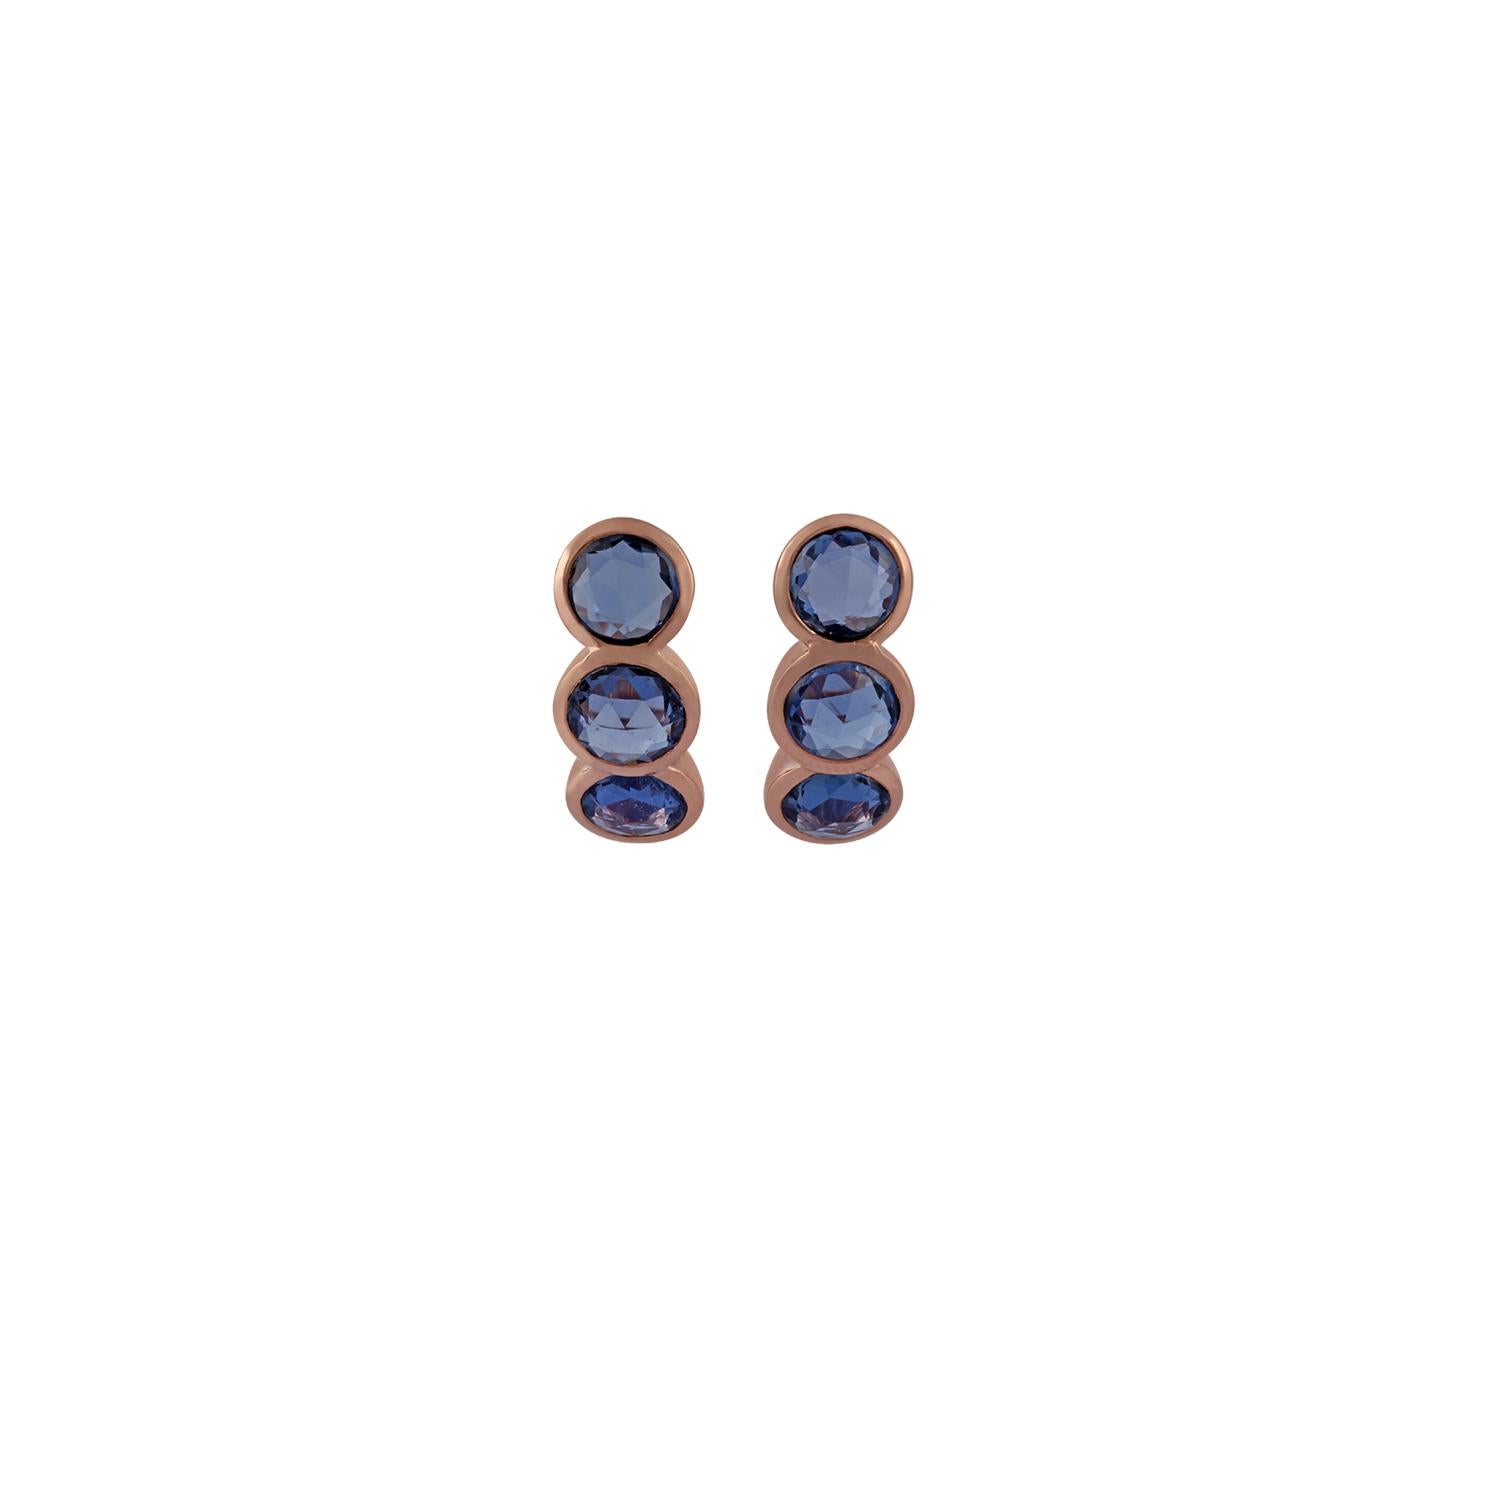 This is an elegant pair of earring features 6 rose cuts round-shaped sapphire 5.27 carat, studded in 18 karat rose gold, the total weight of gold in the earring is 4.61 grams, the sapphires are set in the close setting, this earring has a simple